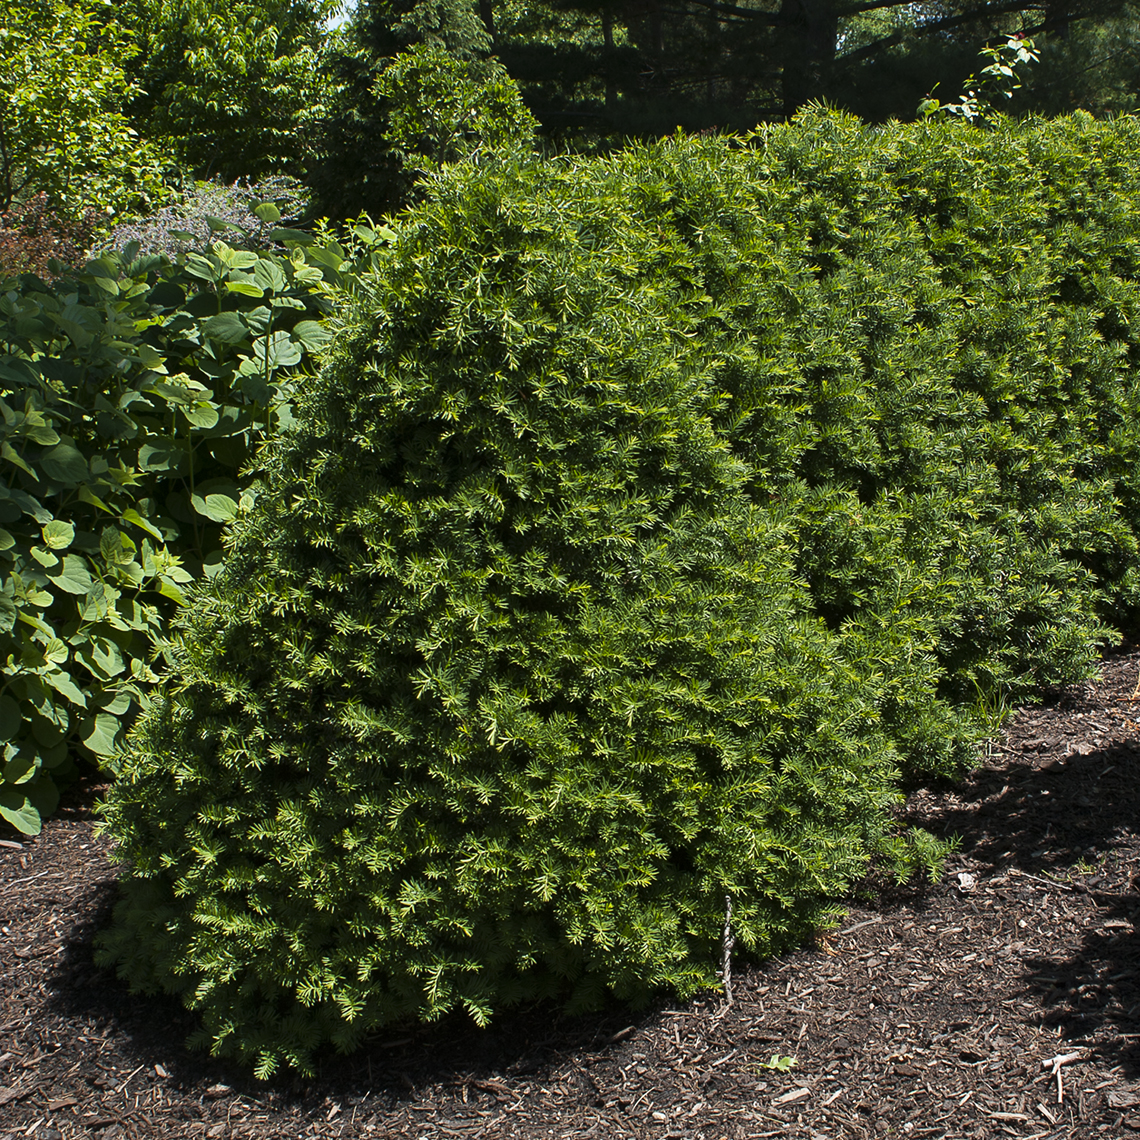 A specimen of Captain a conical variety of yew in a landscape